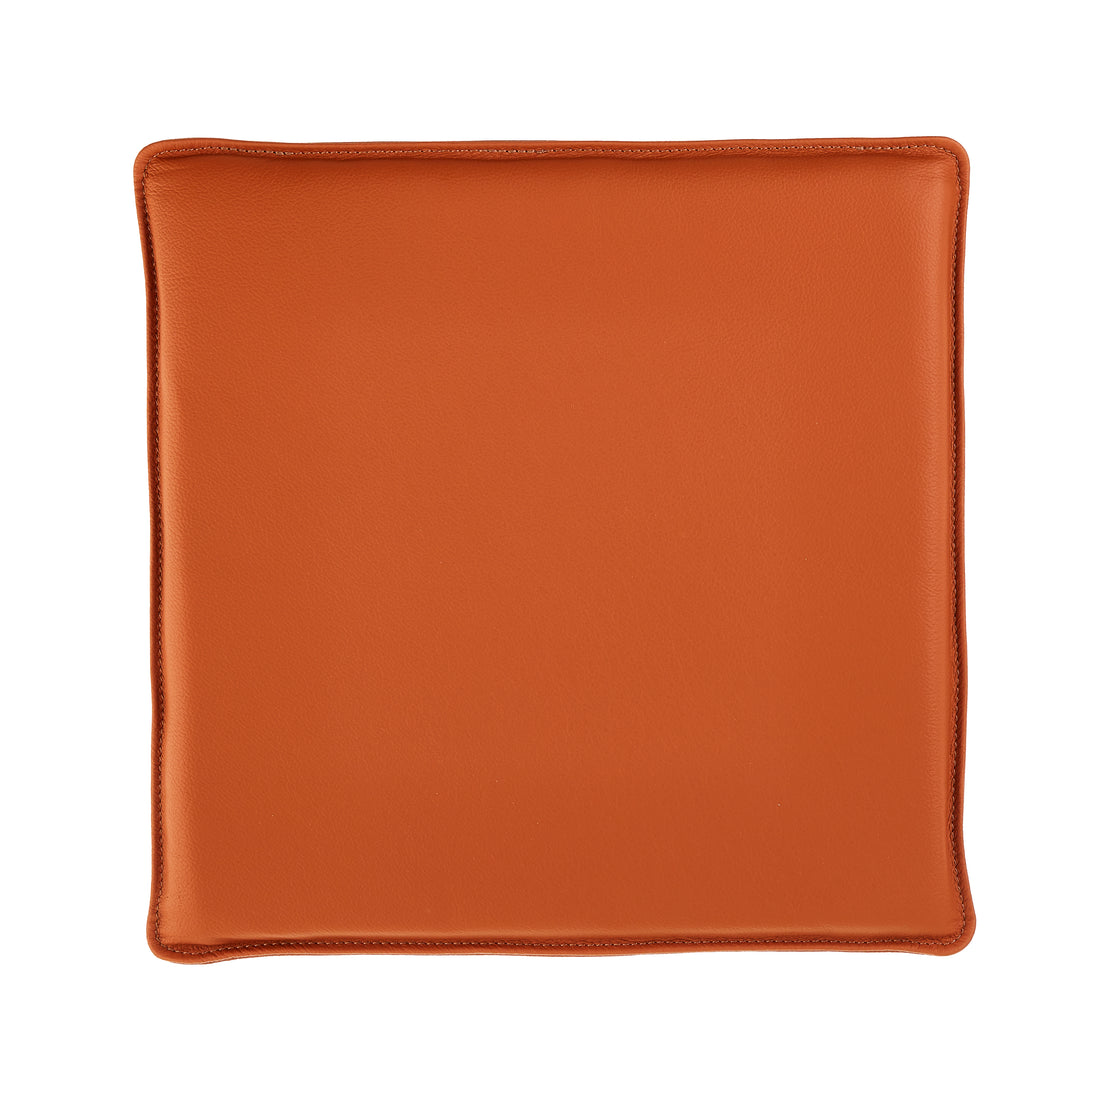 Universal cushion 40x40 cm in cognac leather